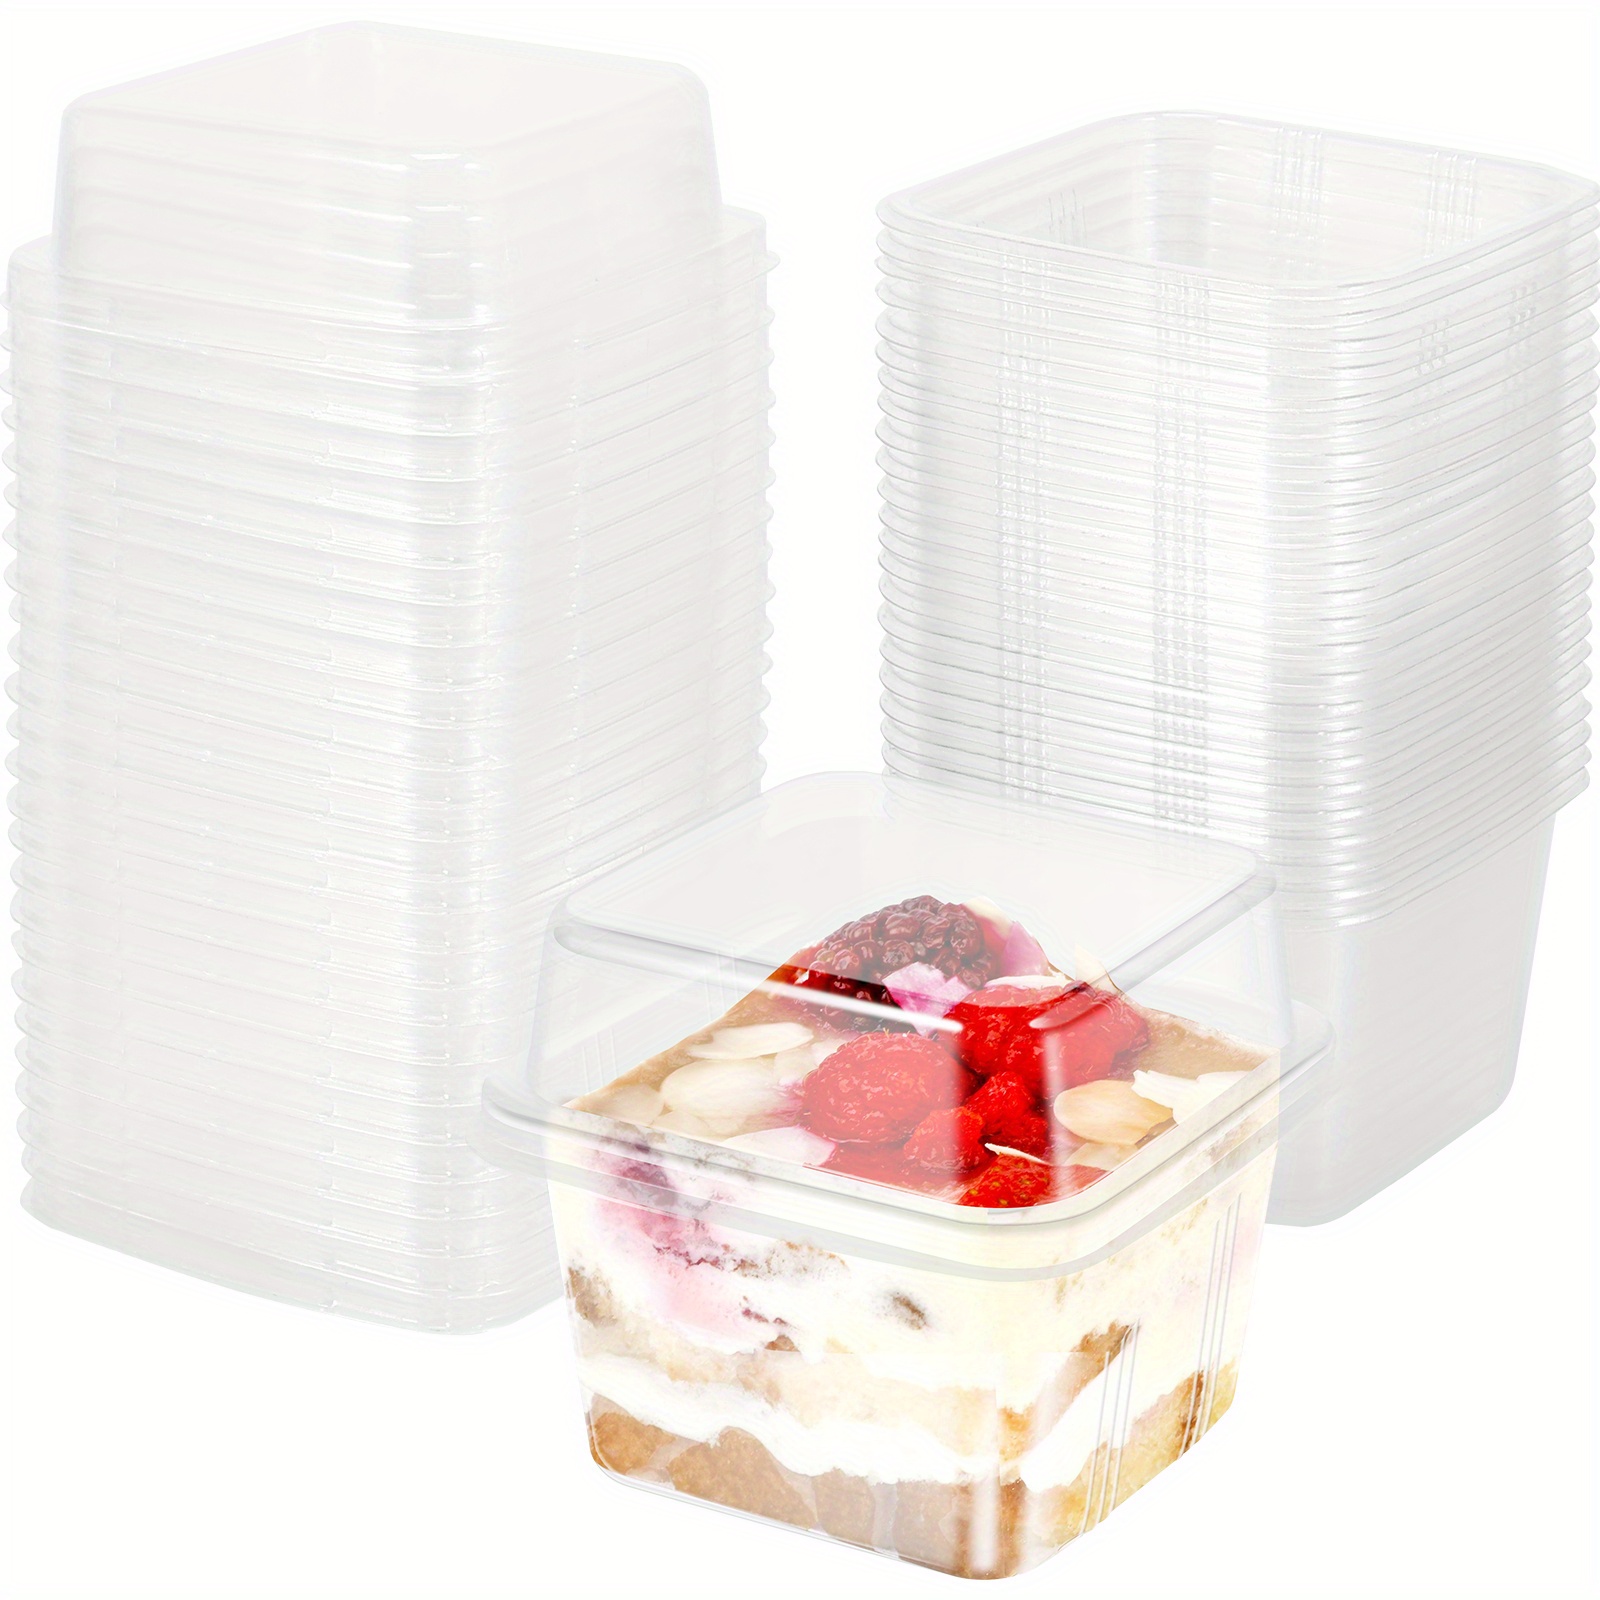 50Pcs/lot Plastic Boxes with Cover Portable Fruits Case One-off Takeout  Food Containers for Home Party Wedding Transparent Box